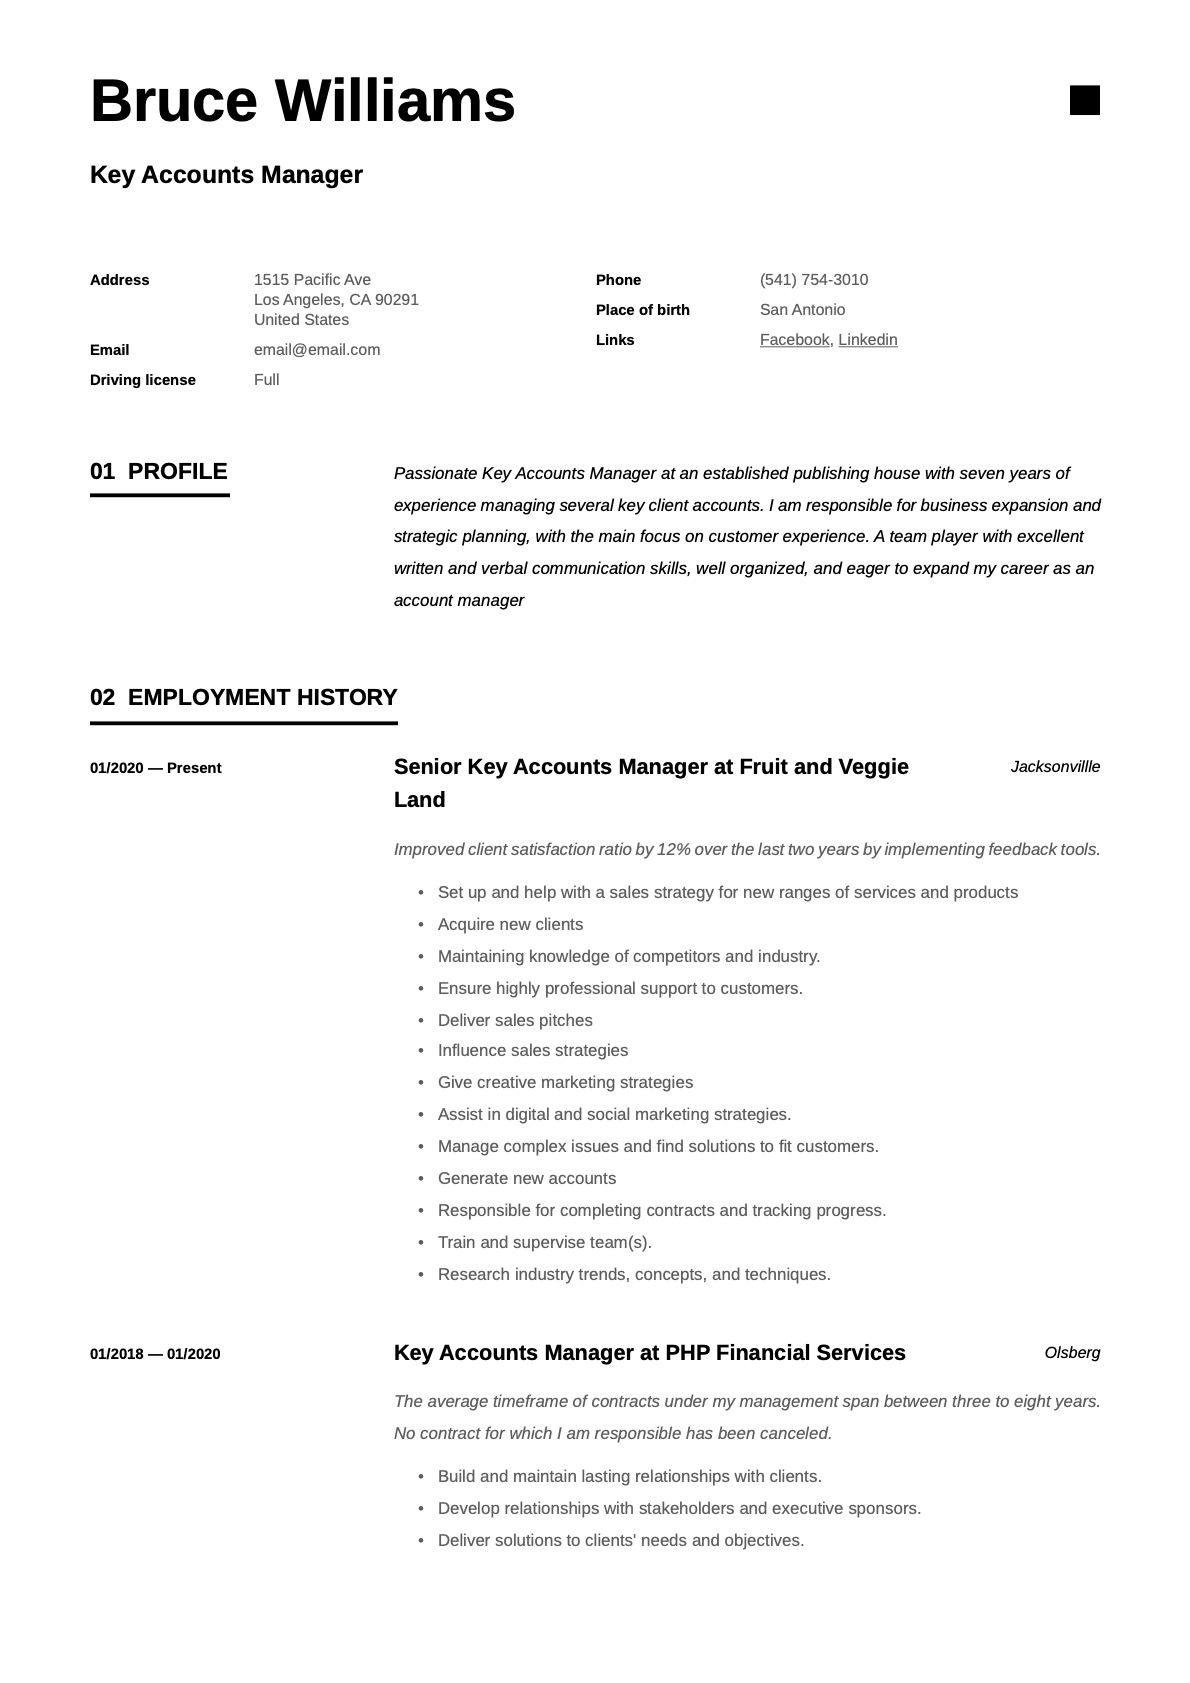 Example resume key accounts manager-11